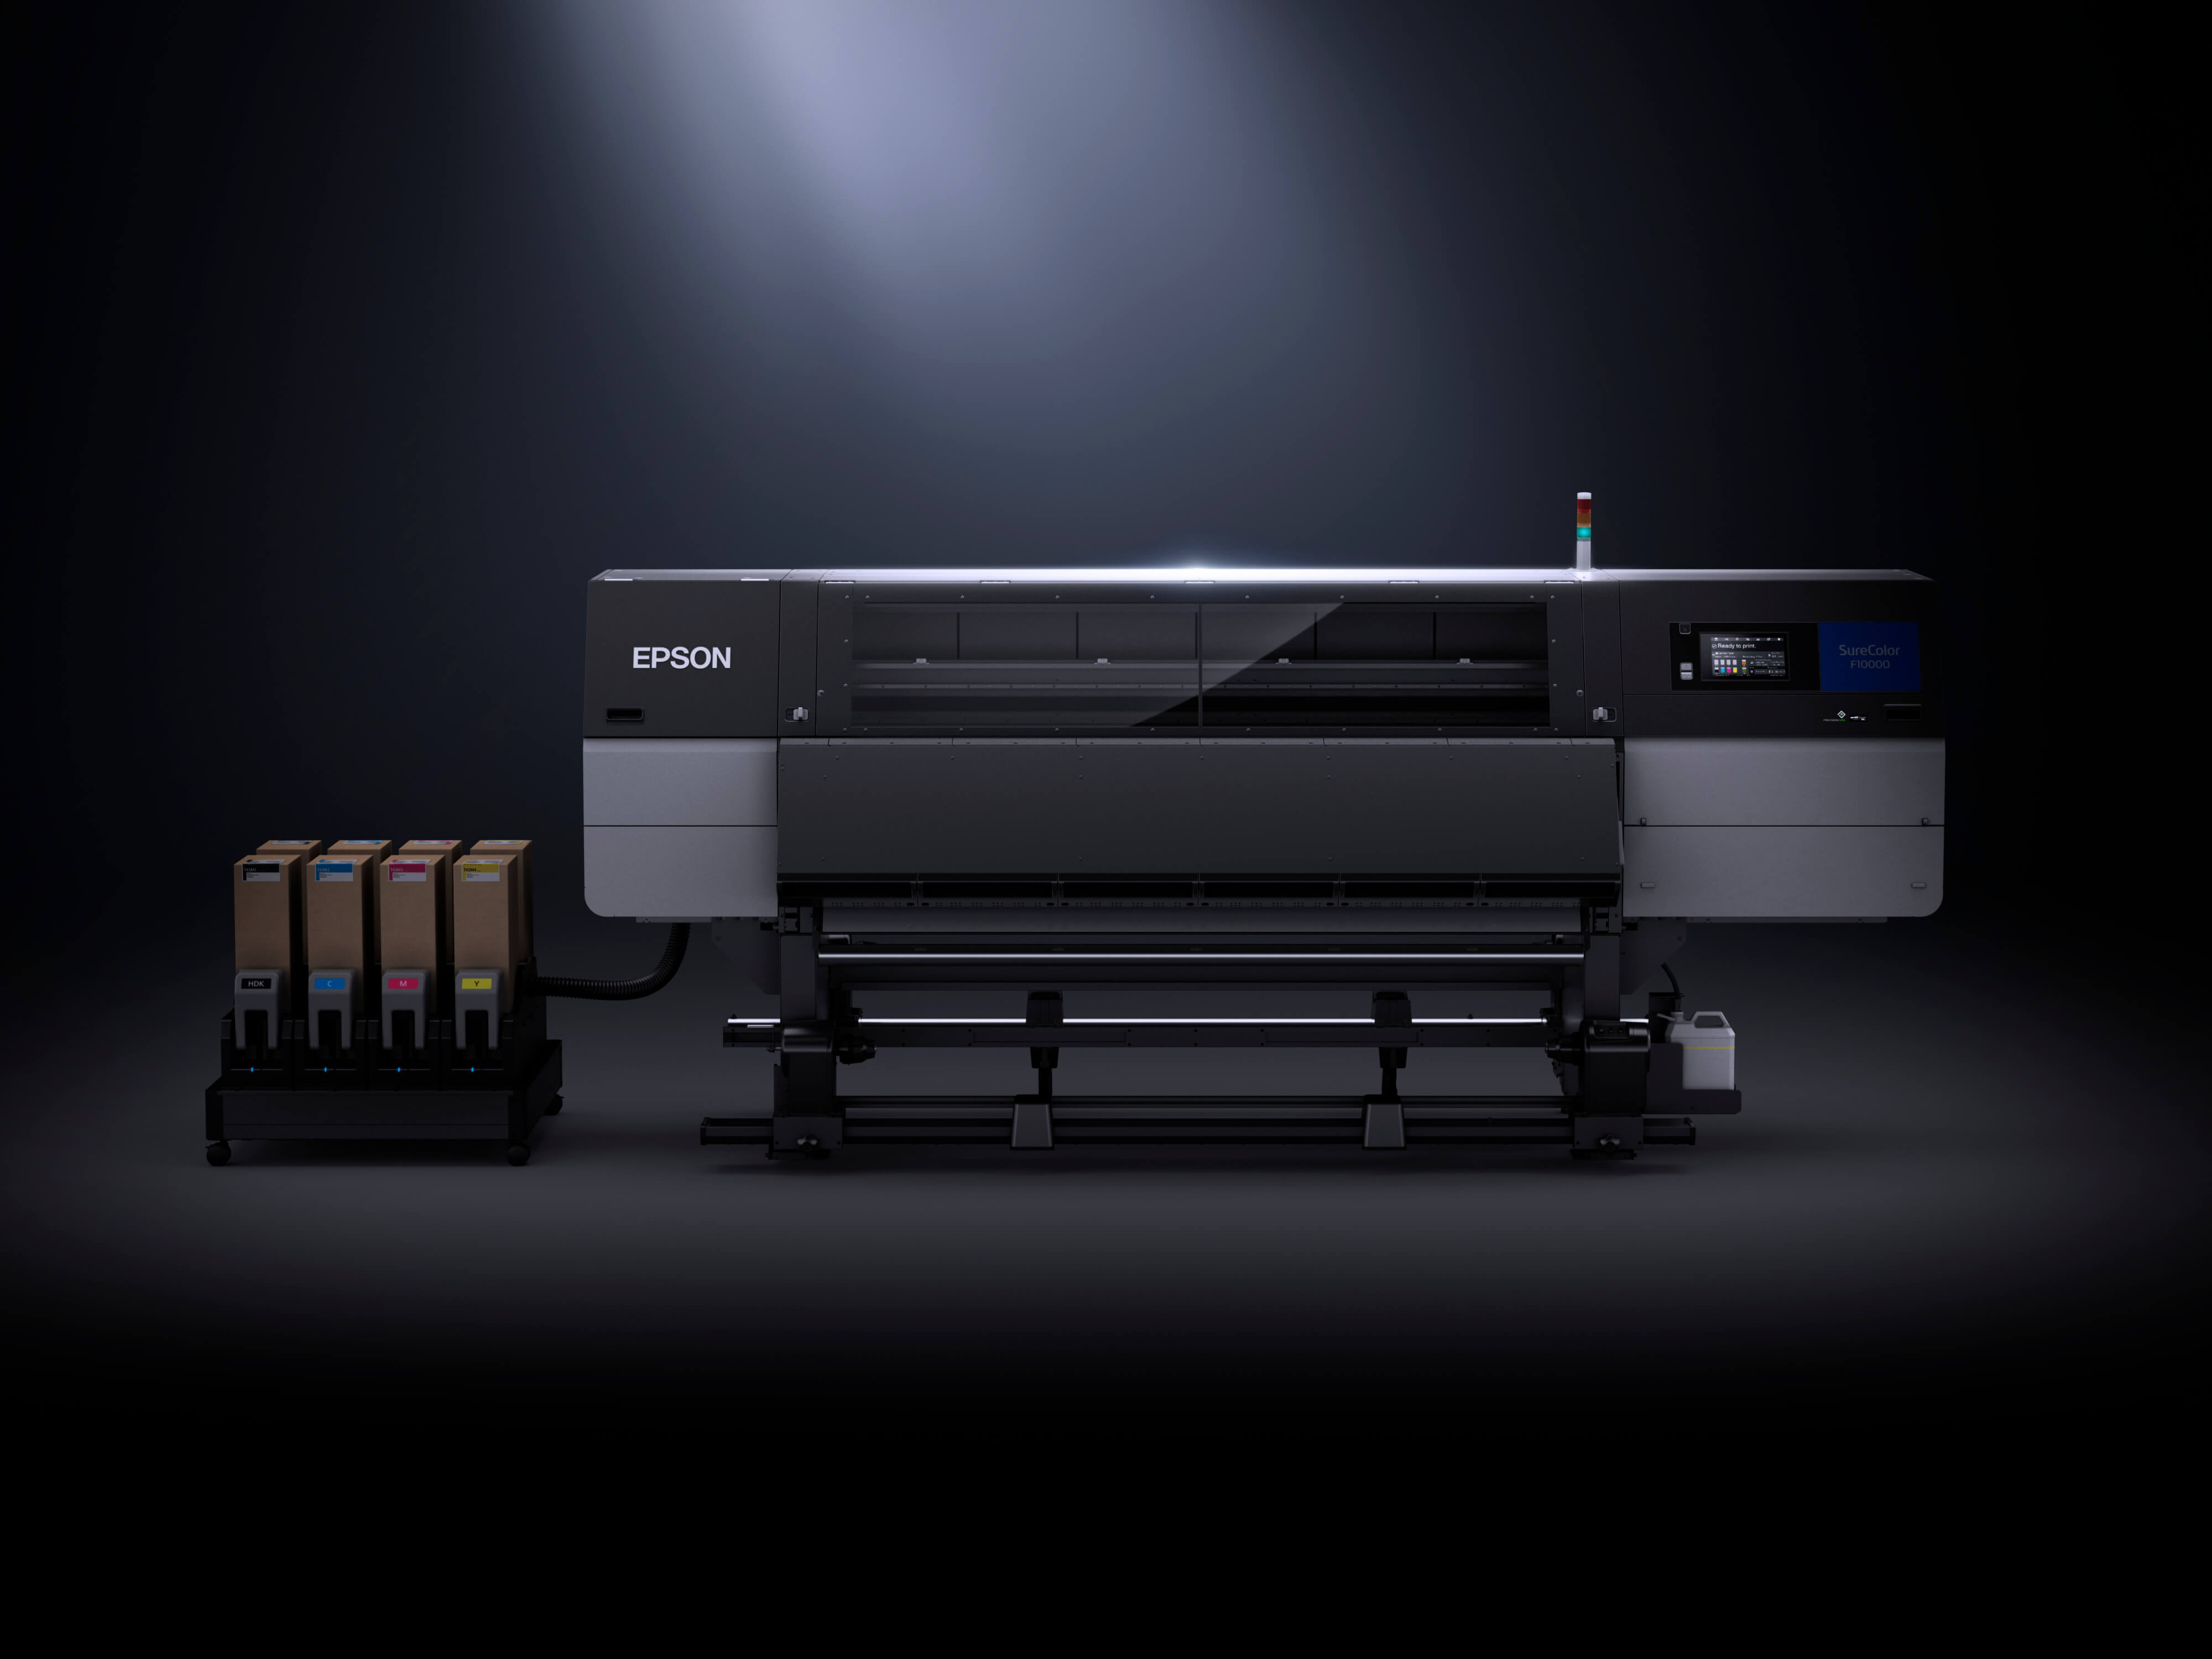 Epson launches new industrial dye-sublimation printer